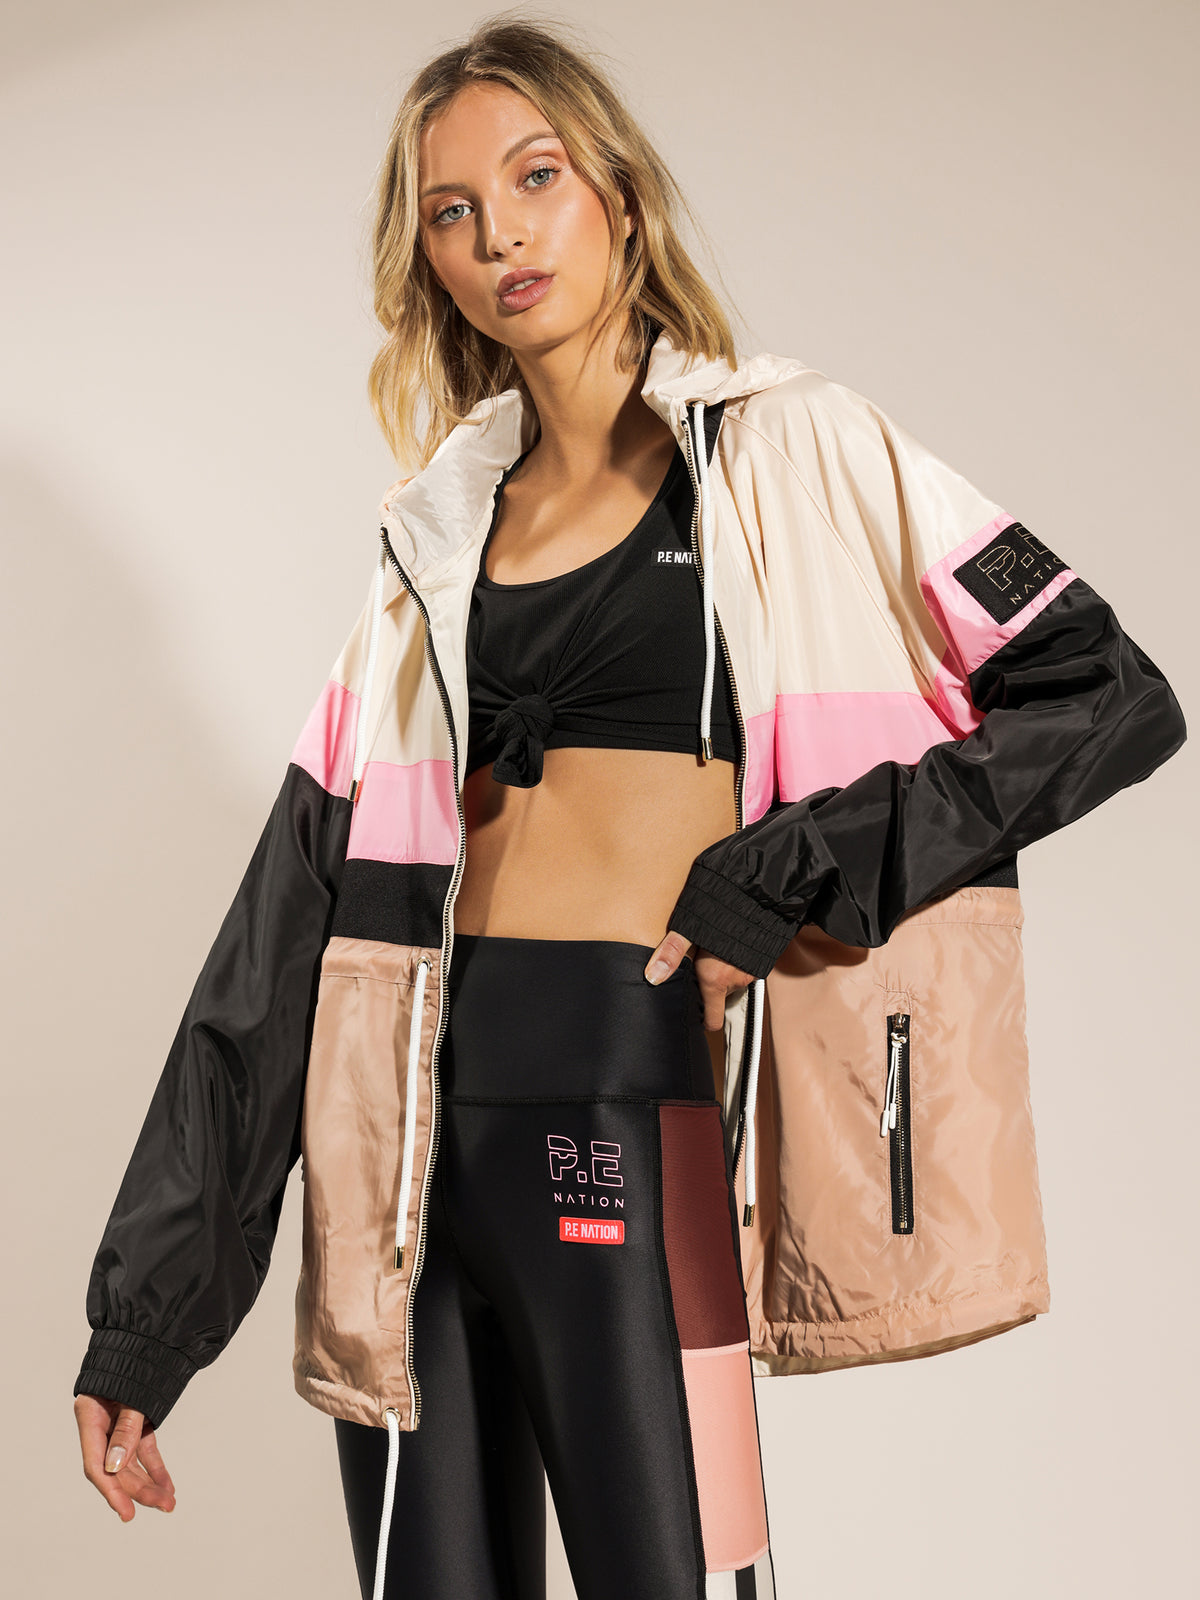 Speed Cut Jacket in Coral Pink